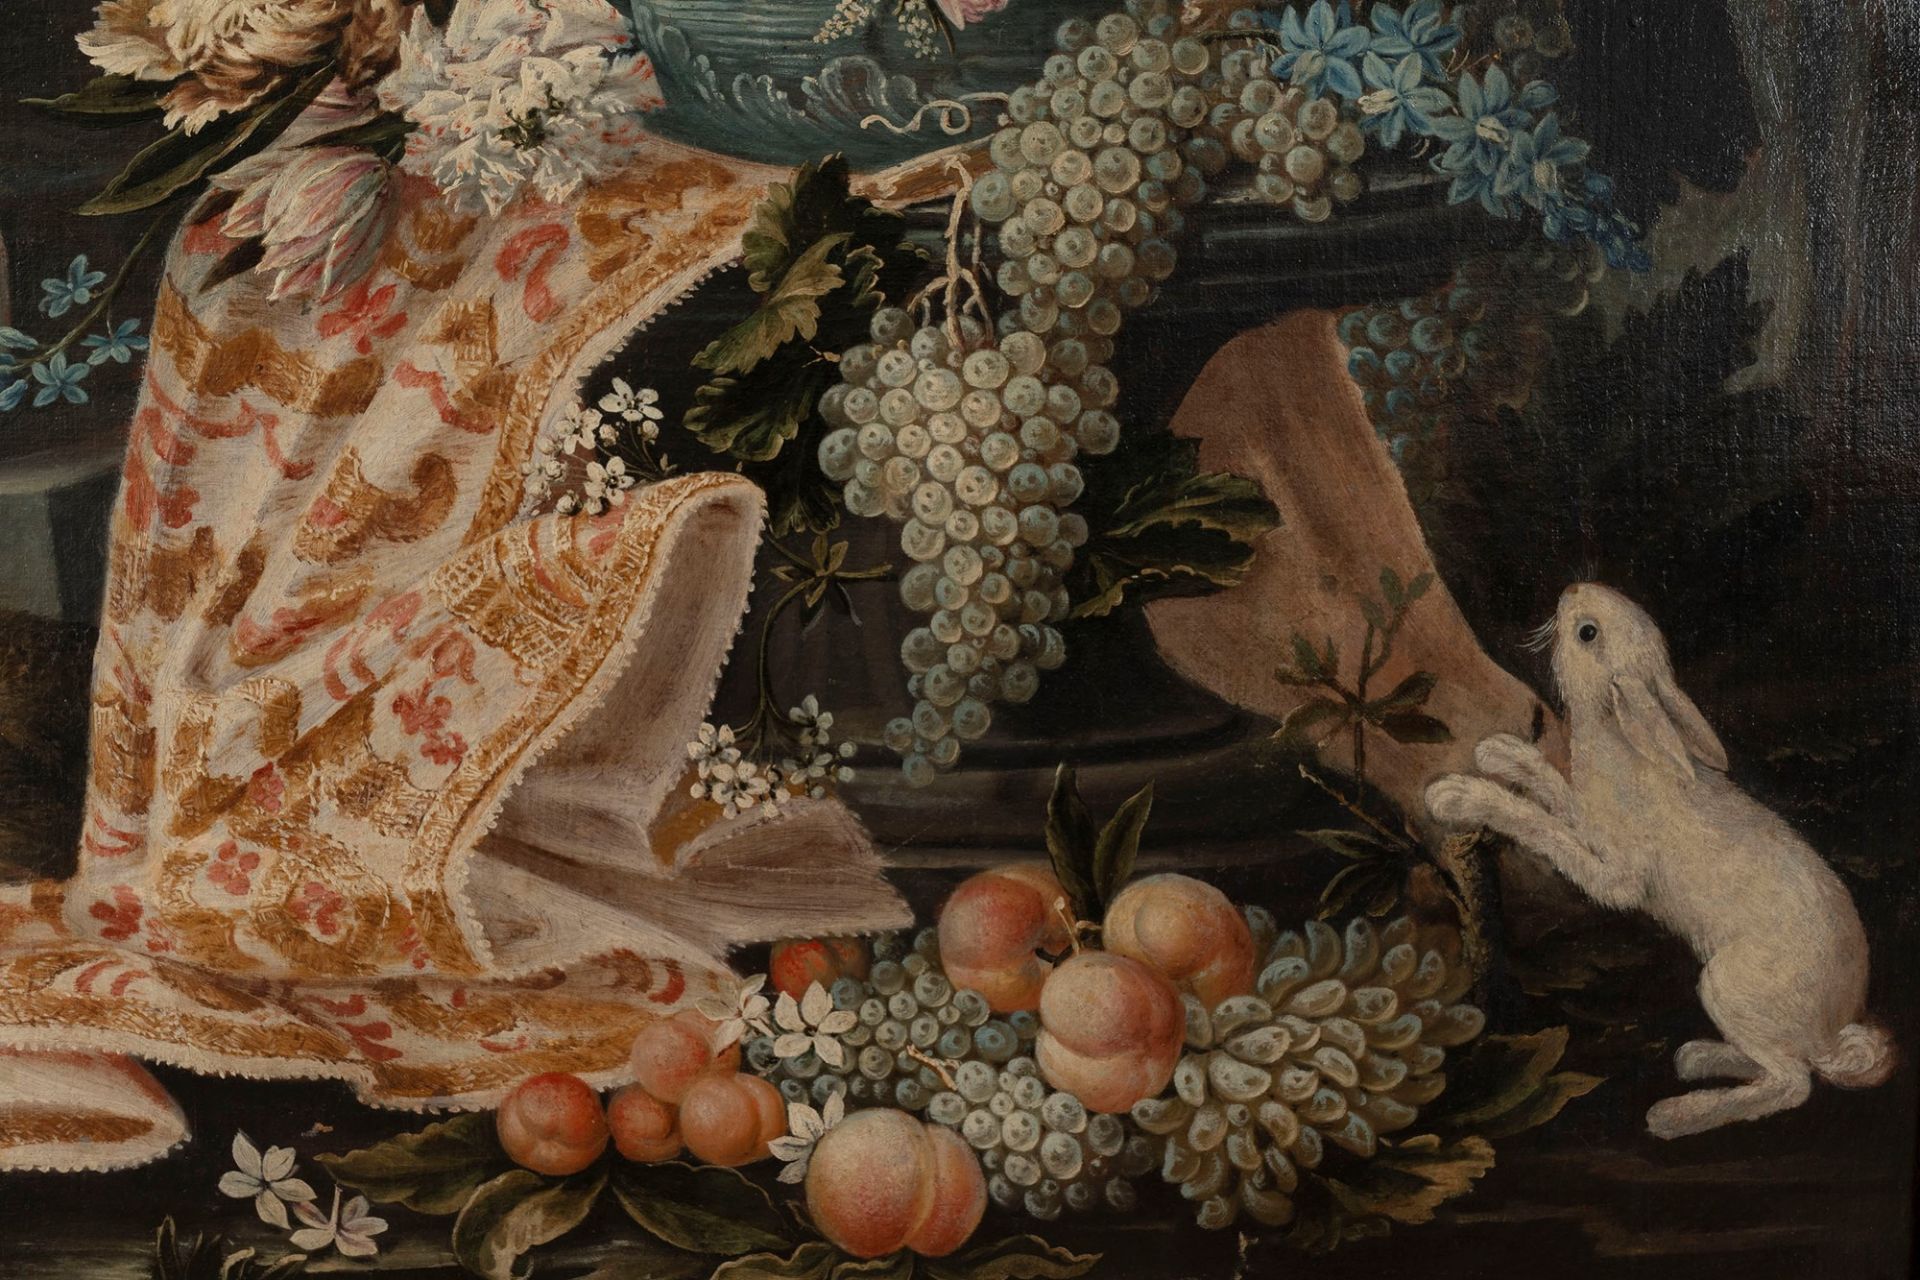 Lombard School, XVIII century - Flowers and fruit in an Italian garden with bunnies and parrots - Image 4 of 8